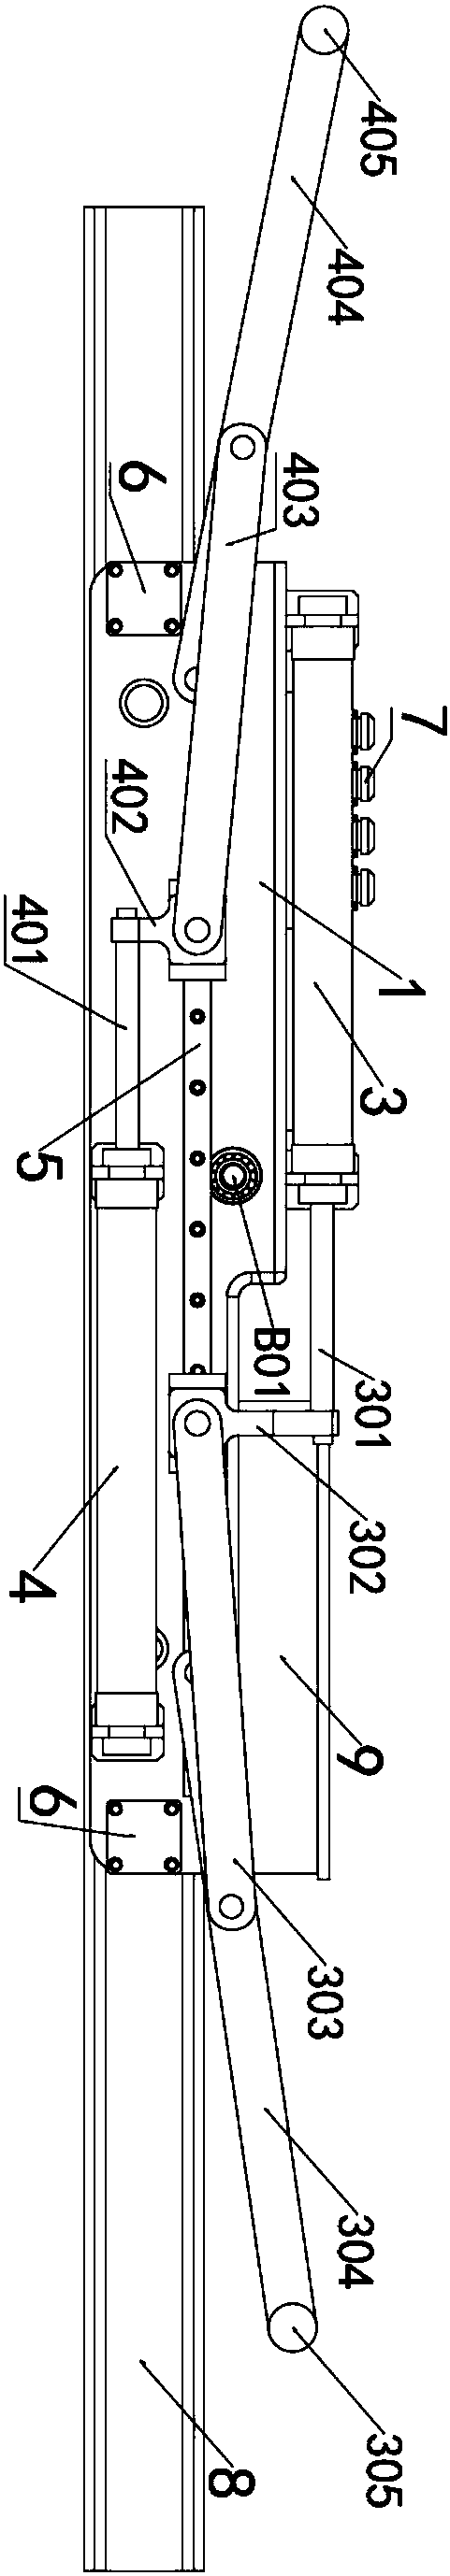 Intermittent-type carrying device with limiting function